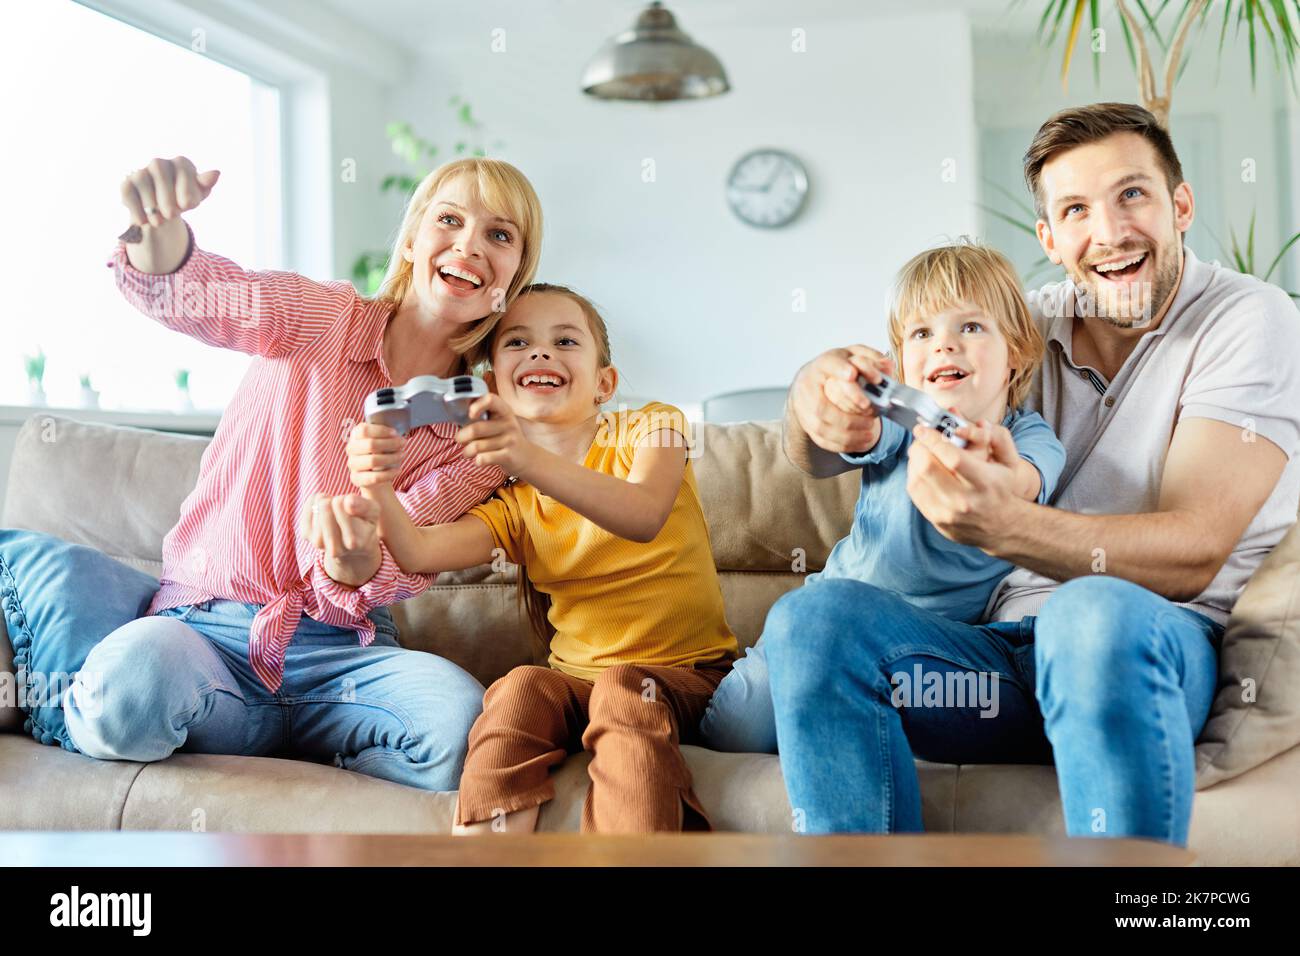 child son daughter father mother family happy playing console kid childhood joystick cotroller boy girl having fun together teamwork gaming Stock Photo